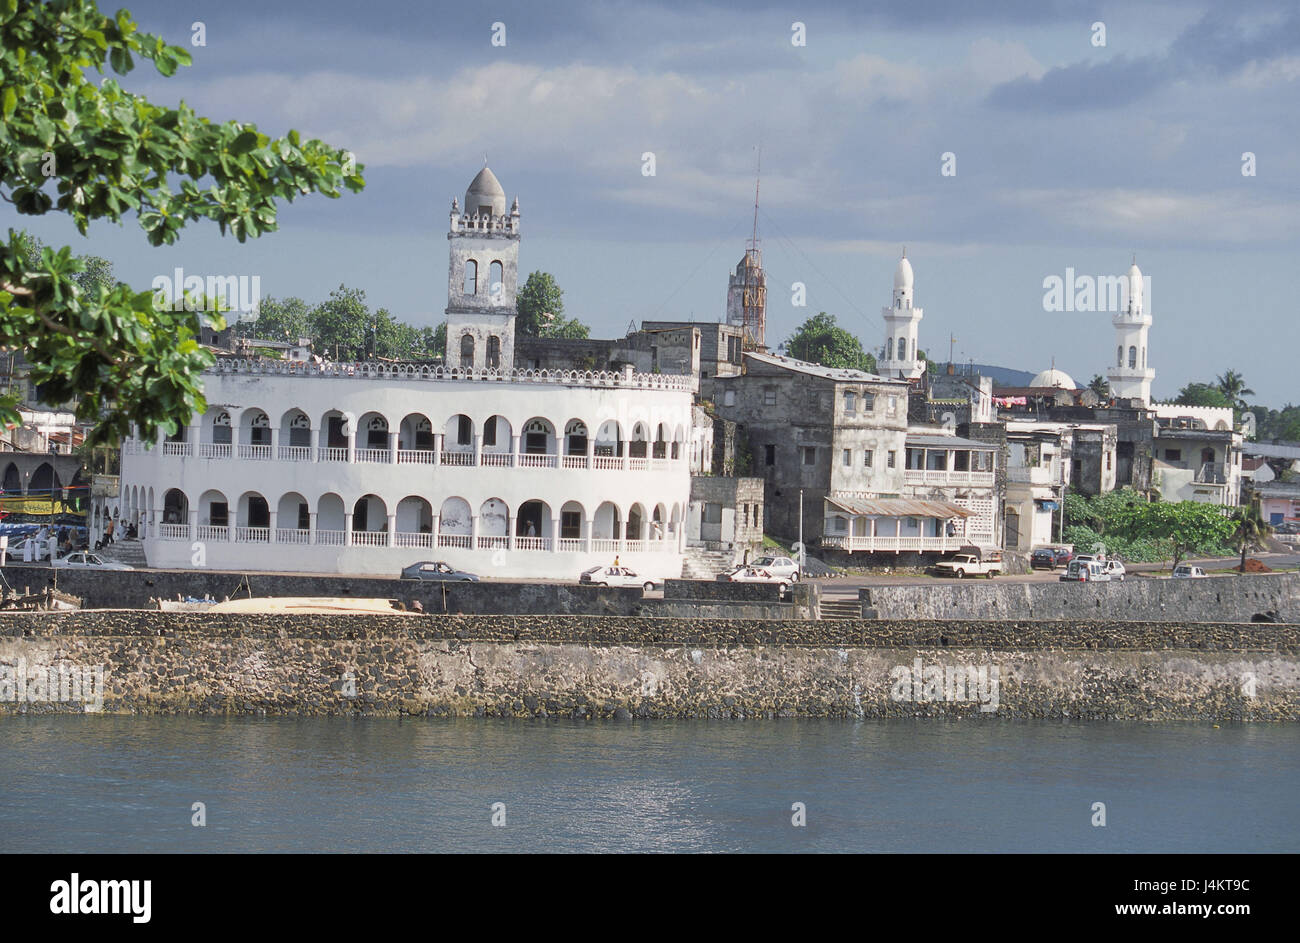 The Comoro Archipelago, island Grand Comore, Moroni, town view, mosques, harbour of Africa, island state, Indian ocean, Njazidja, town, place of interest, townscape, churches, sacred setting, architecture, towers, minarets, faith, religion, Islam, harbour defensive wall Stock Photo